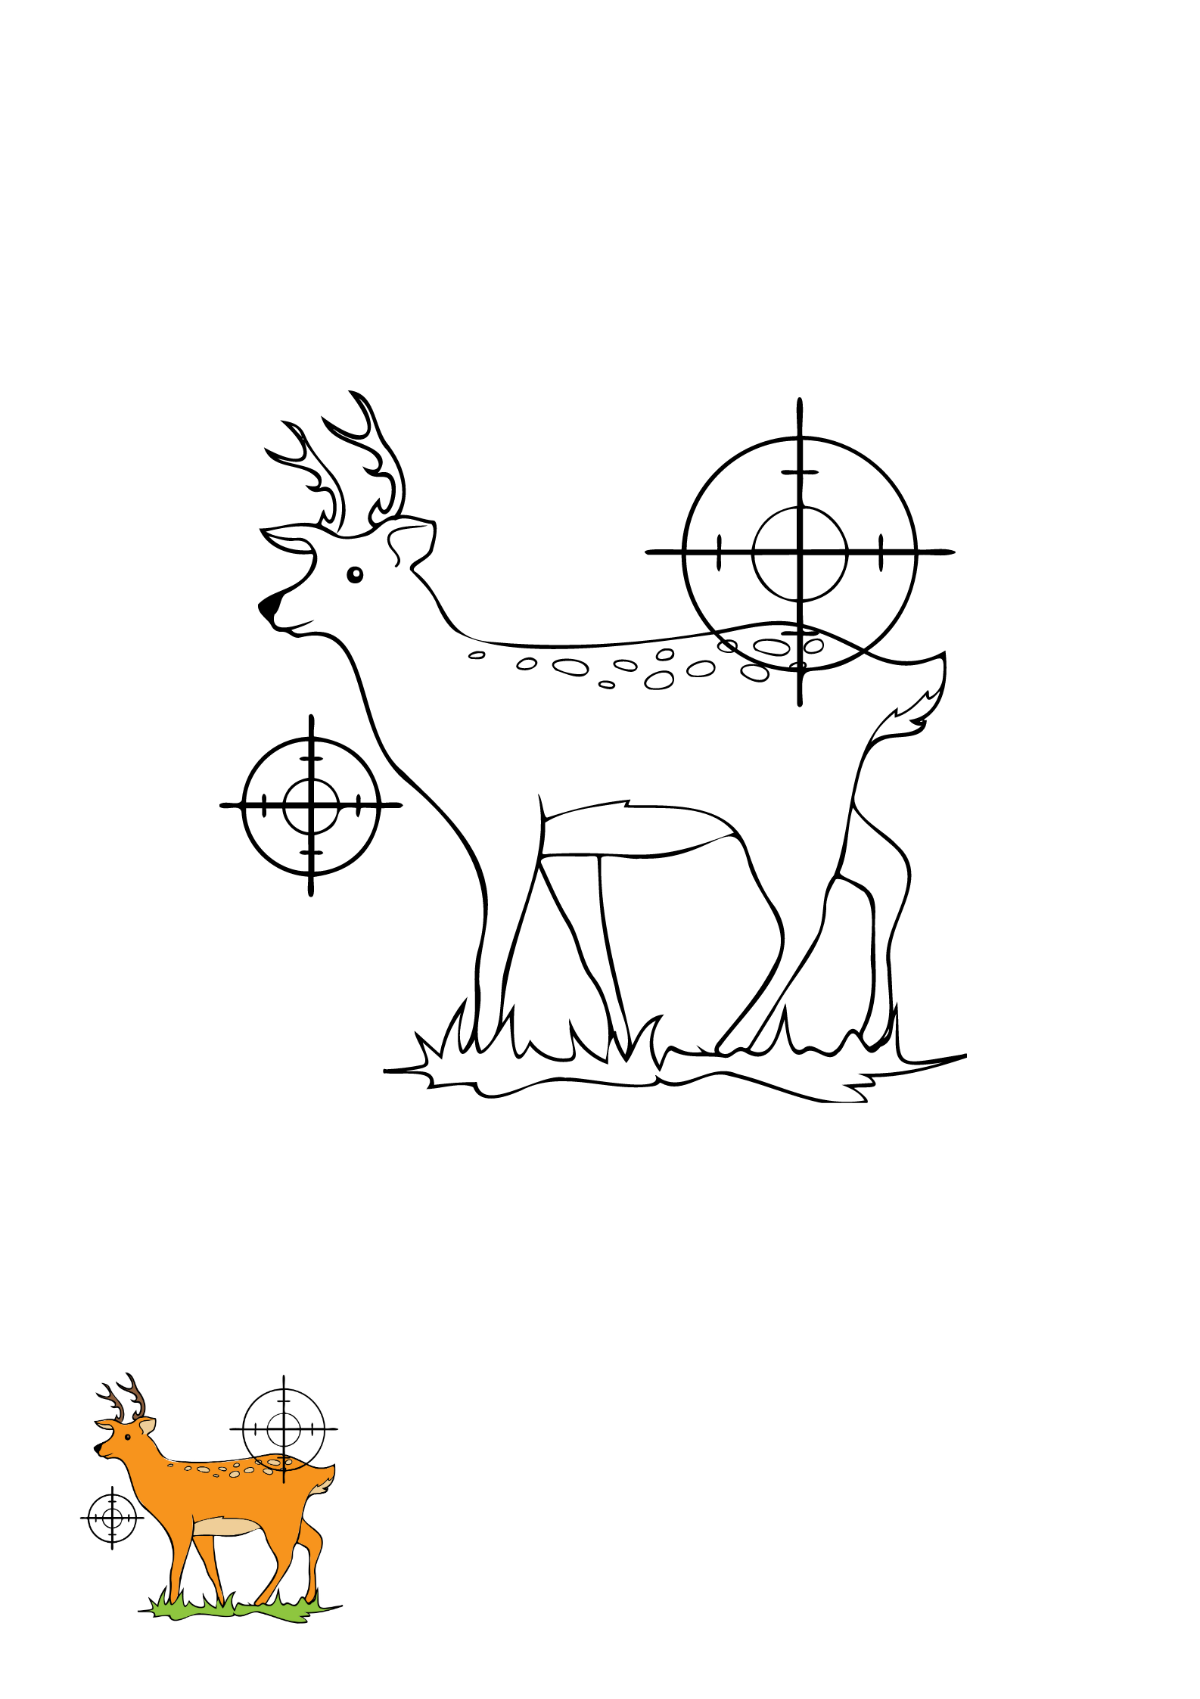 Deer Hunting Coloring Page Template